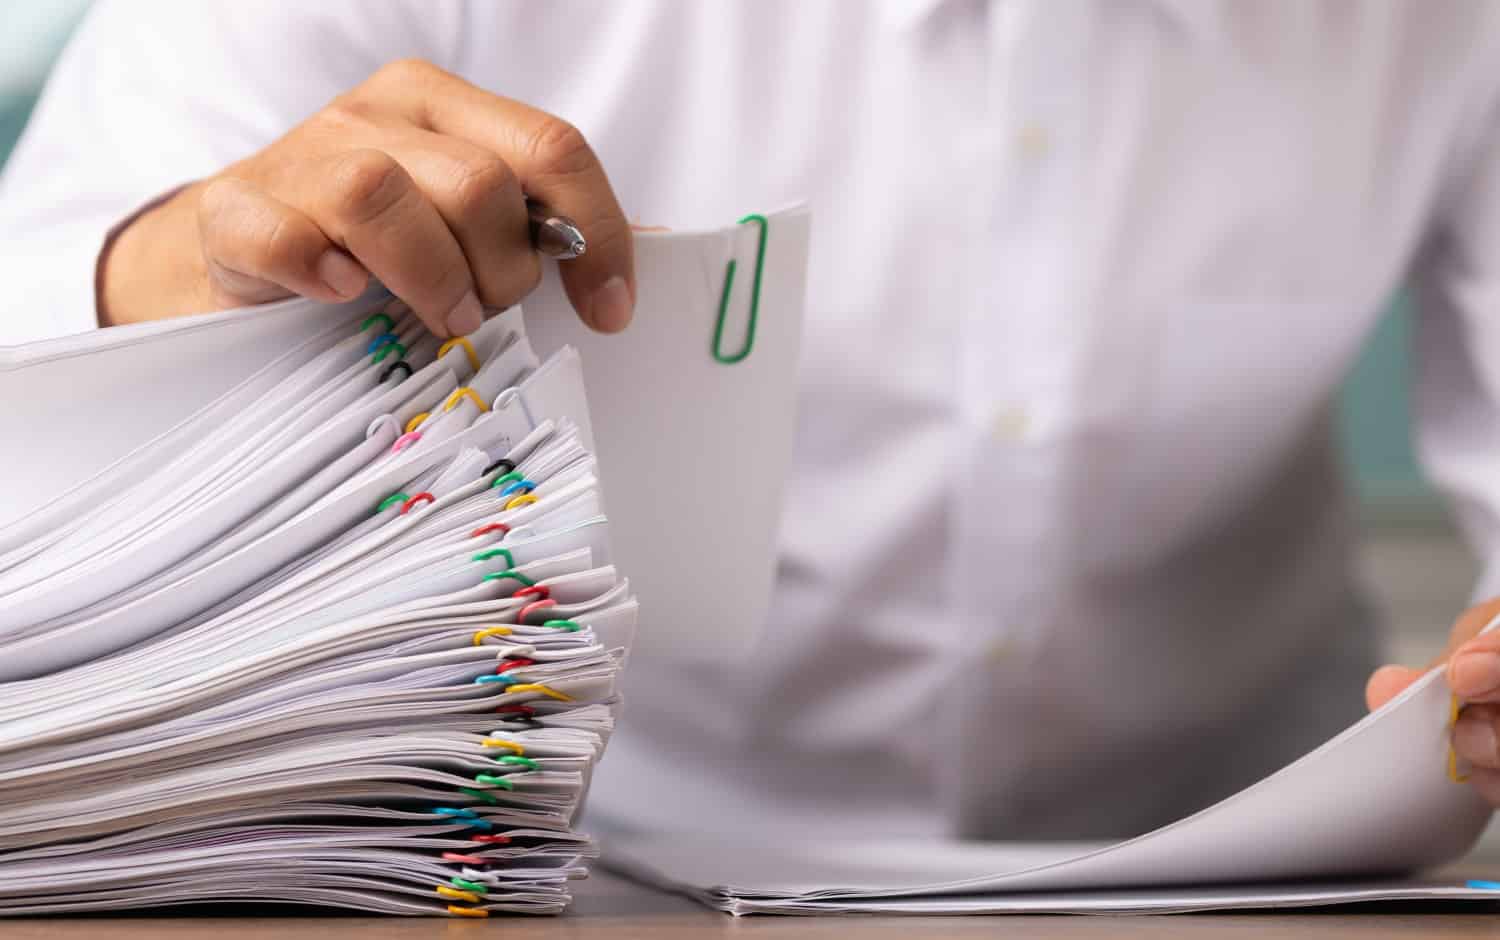 stock-photo-business-man-or-office-workers-with-white-shirt-holding-documents-for-writing-on-office-desk-stack-1914206386